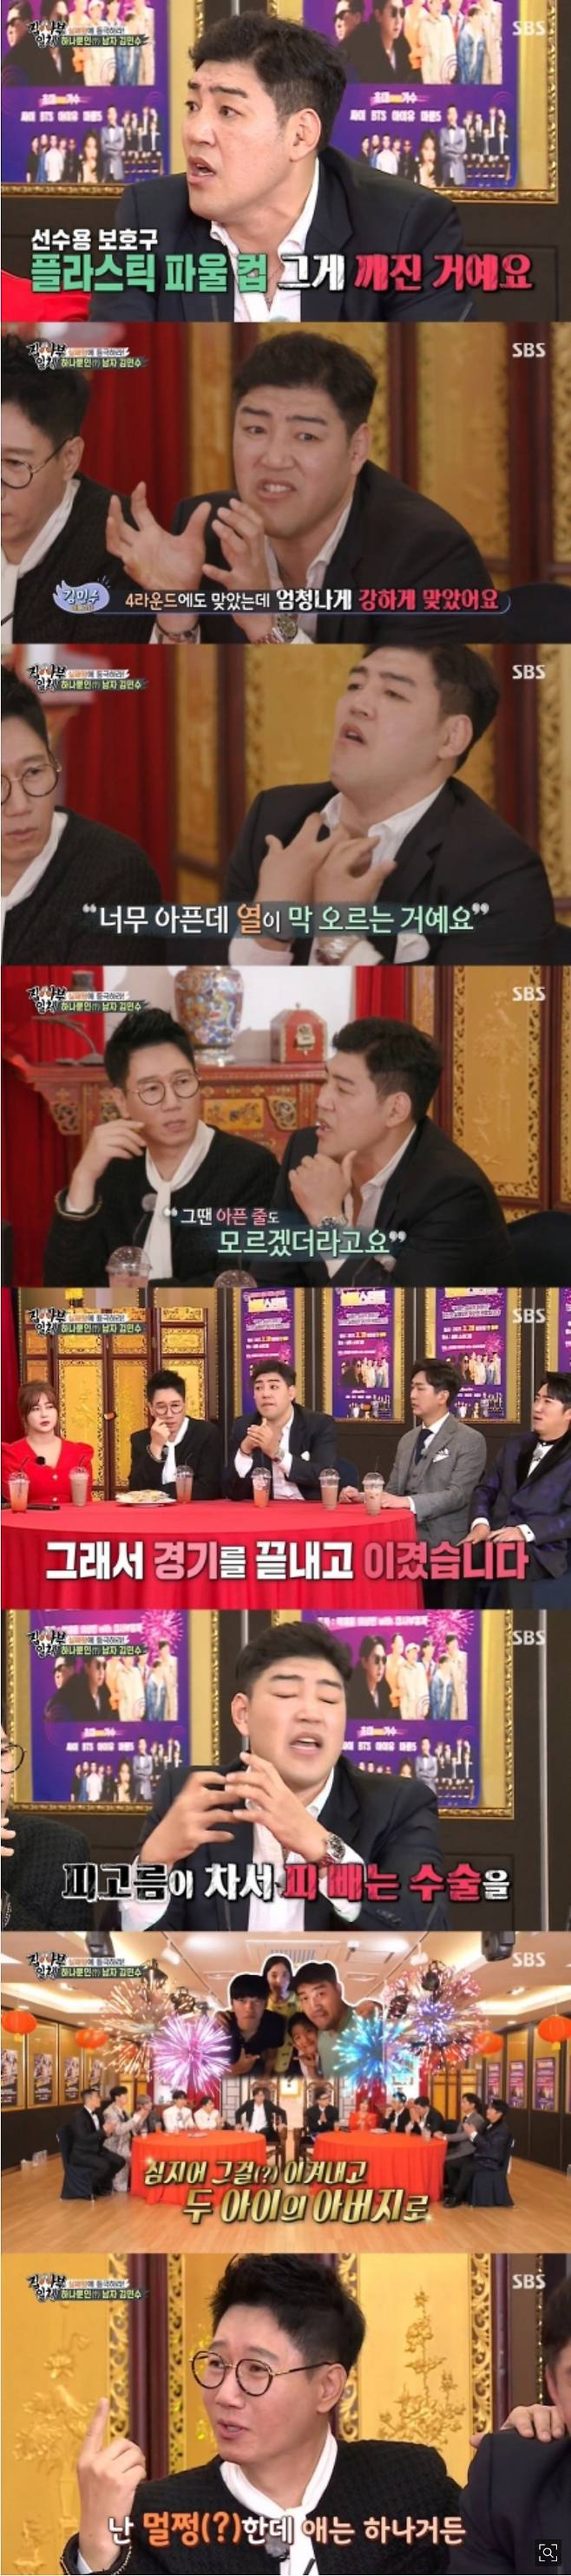 The stars candidly convey their Failure stories.SBS entertainment program All The Butlers was featured in Failure Star Top 5 feature, and comedian Ji Suk-jin, Jang Dong-min, former Baseball player Shim Soo-chang, mixed martial arts player Kim Min-soo, singer and artist Solbi talked about his Failure.All The Butlers, which gave a great hope and laughter to a tired modern man, to give a success incentive of 1 million won to FailureKing.Those who were dissatisfied with the title of FailureKing also turned to an active attitude when a bundle of money of 1 million won was released.In Kim Min-soos words, everyone said, Its a pain that you can not even imagine.In particular, Shin Sung-rok said, I survived and two children became fathers. Ji Suk-jin laughed, saying, I am fine, but I have a child.Shim Soo-chang talked about Failure Dam during the Baseball player.I once lost, Id have a record, he said. I lost 18 straight and I was going to drop it. I said I would donate every win during the losing streak.He also said that he could not remember the face of a person well, and he also told about the dizzying memory that he did not recognize Nexen and asked the boss about laundry sponsorship.Jang Dong-min, who said Jewelry was over the key to the pawn shop, evaporated 150 million won from interest to bank deposit for six months from that month.Jang Dong-min went to Jongno and tried to feel Jewelry. As a result, Jewelry, who was worth 1 billion won, was only 40 million won and was bitter.After each of them delivered the Failure story, a game was held for the Failure.Kim Min-soo, who confessed honestly that he lost his testicles as a result of this game, became a FailureKing.